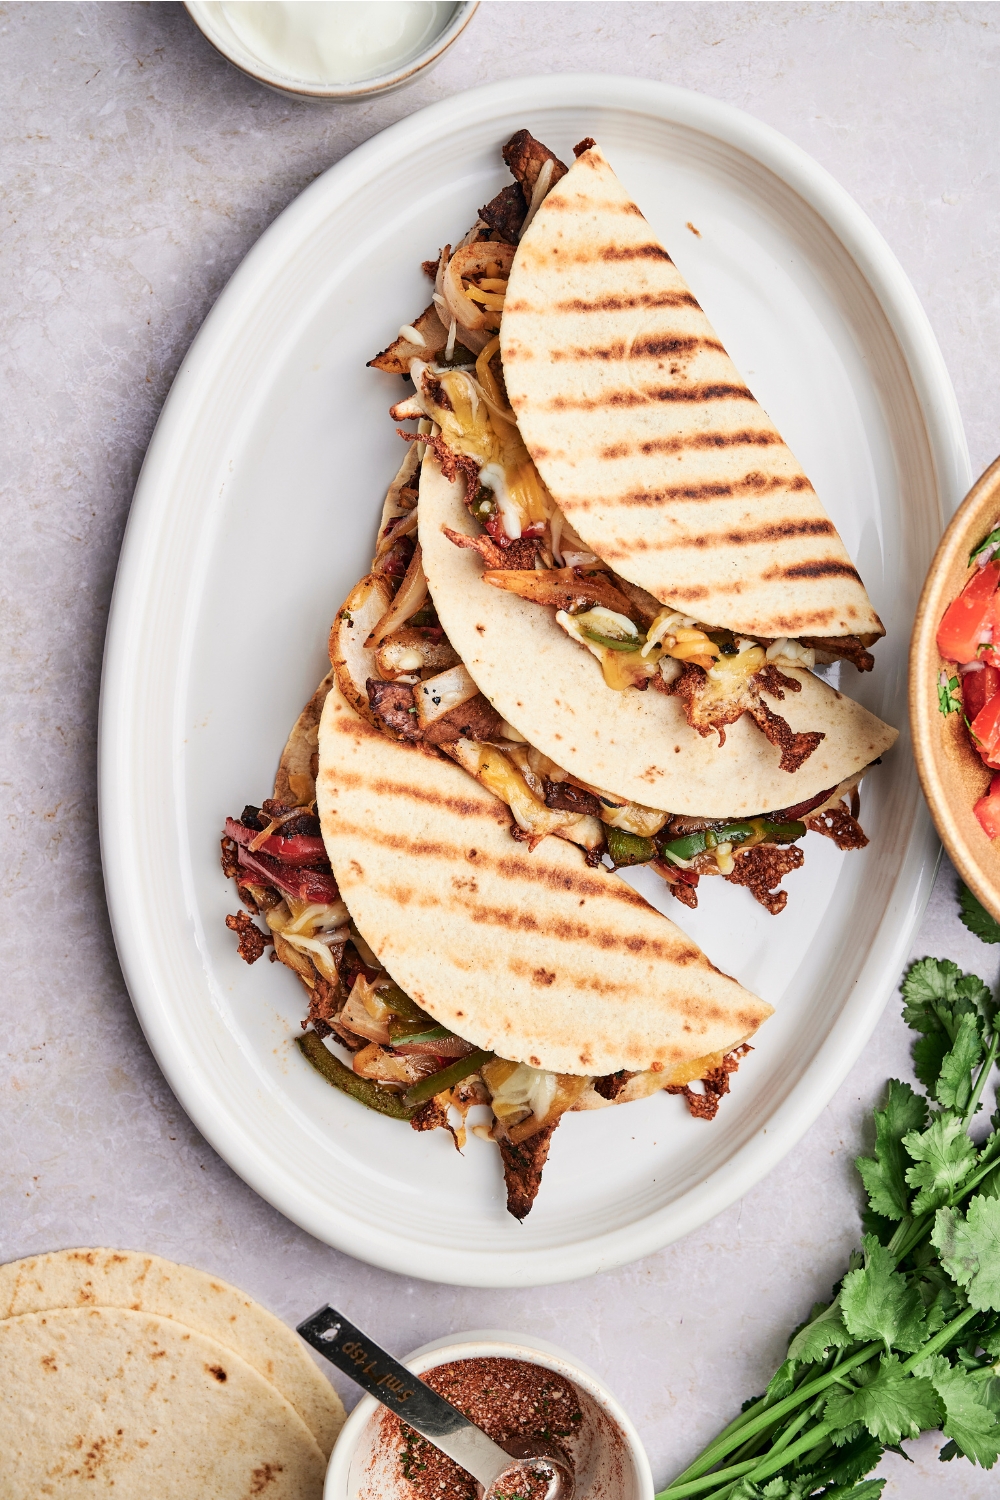 A white plate holds three grilled steak quesadillas. The quesadillas are full of steak, cheese and vegetables.